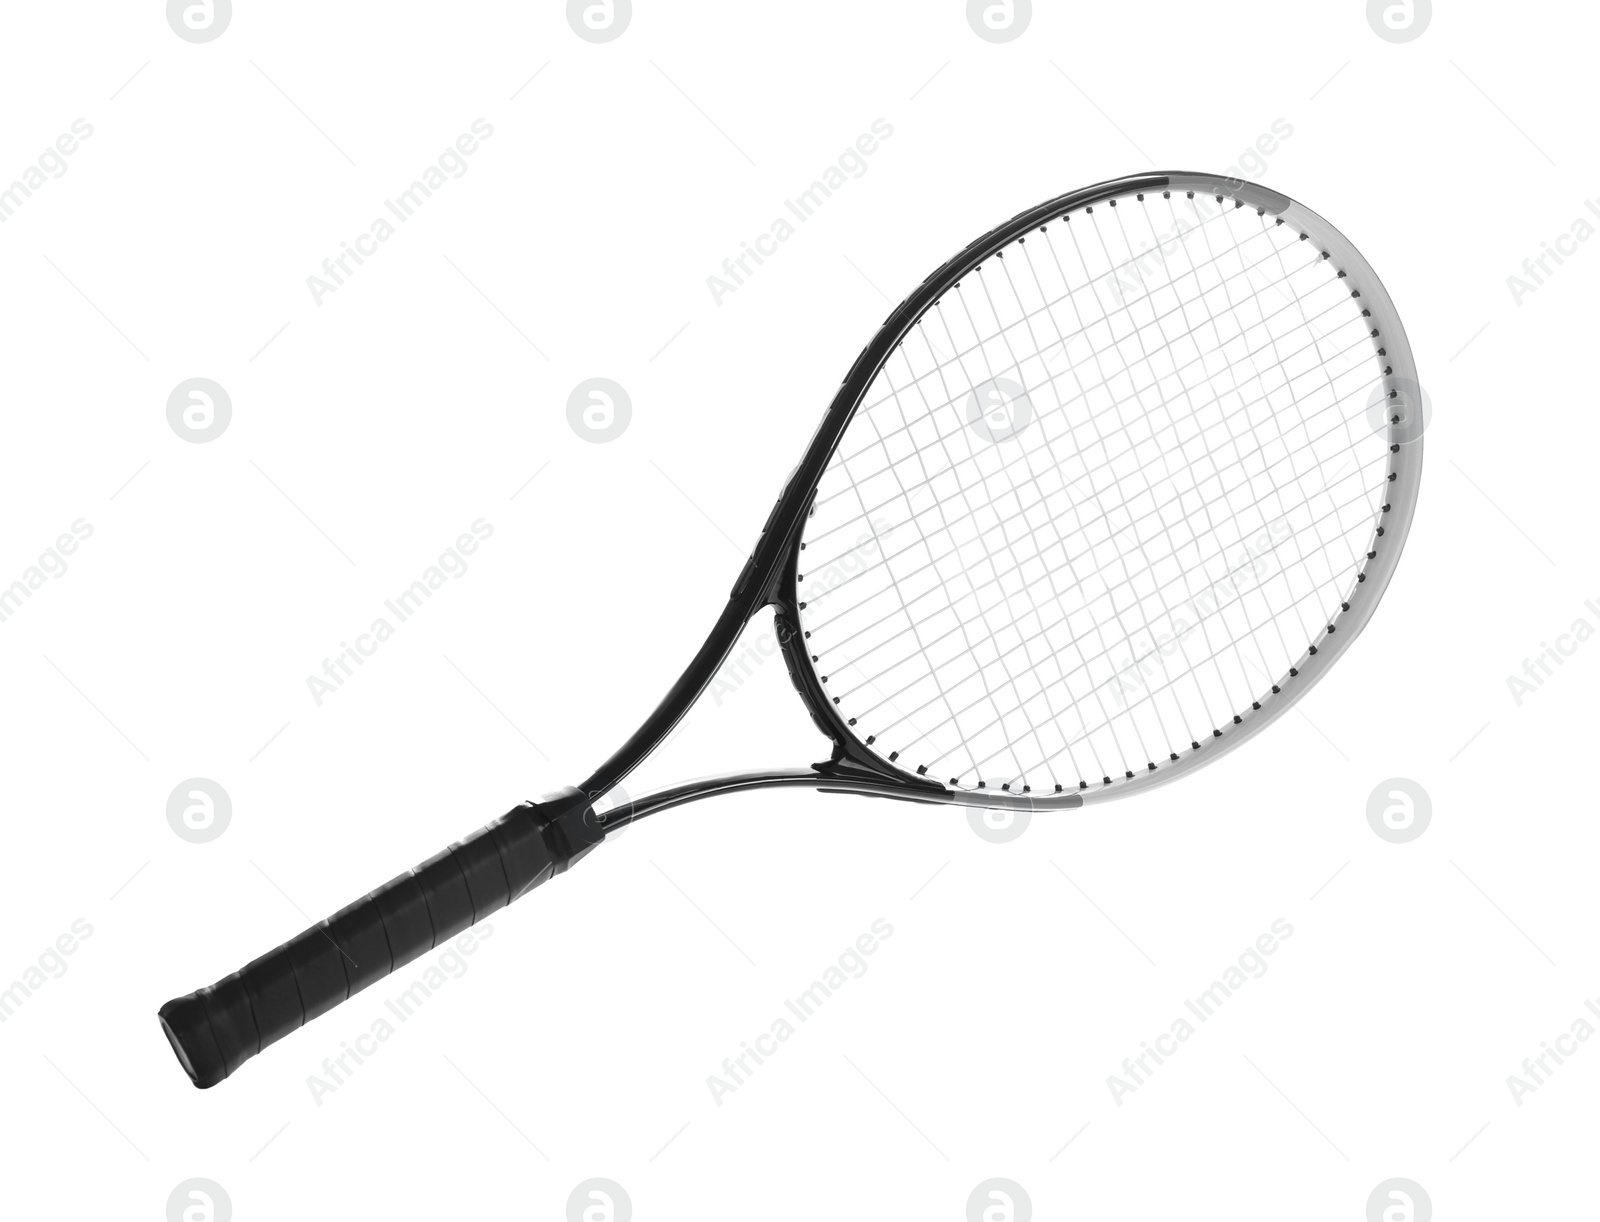 Photo of Tennis racket isolated on white. Sports equipment